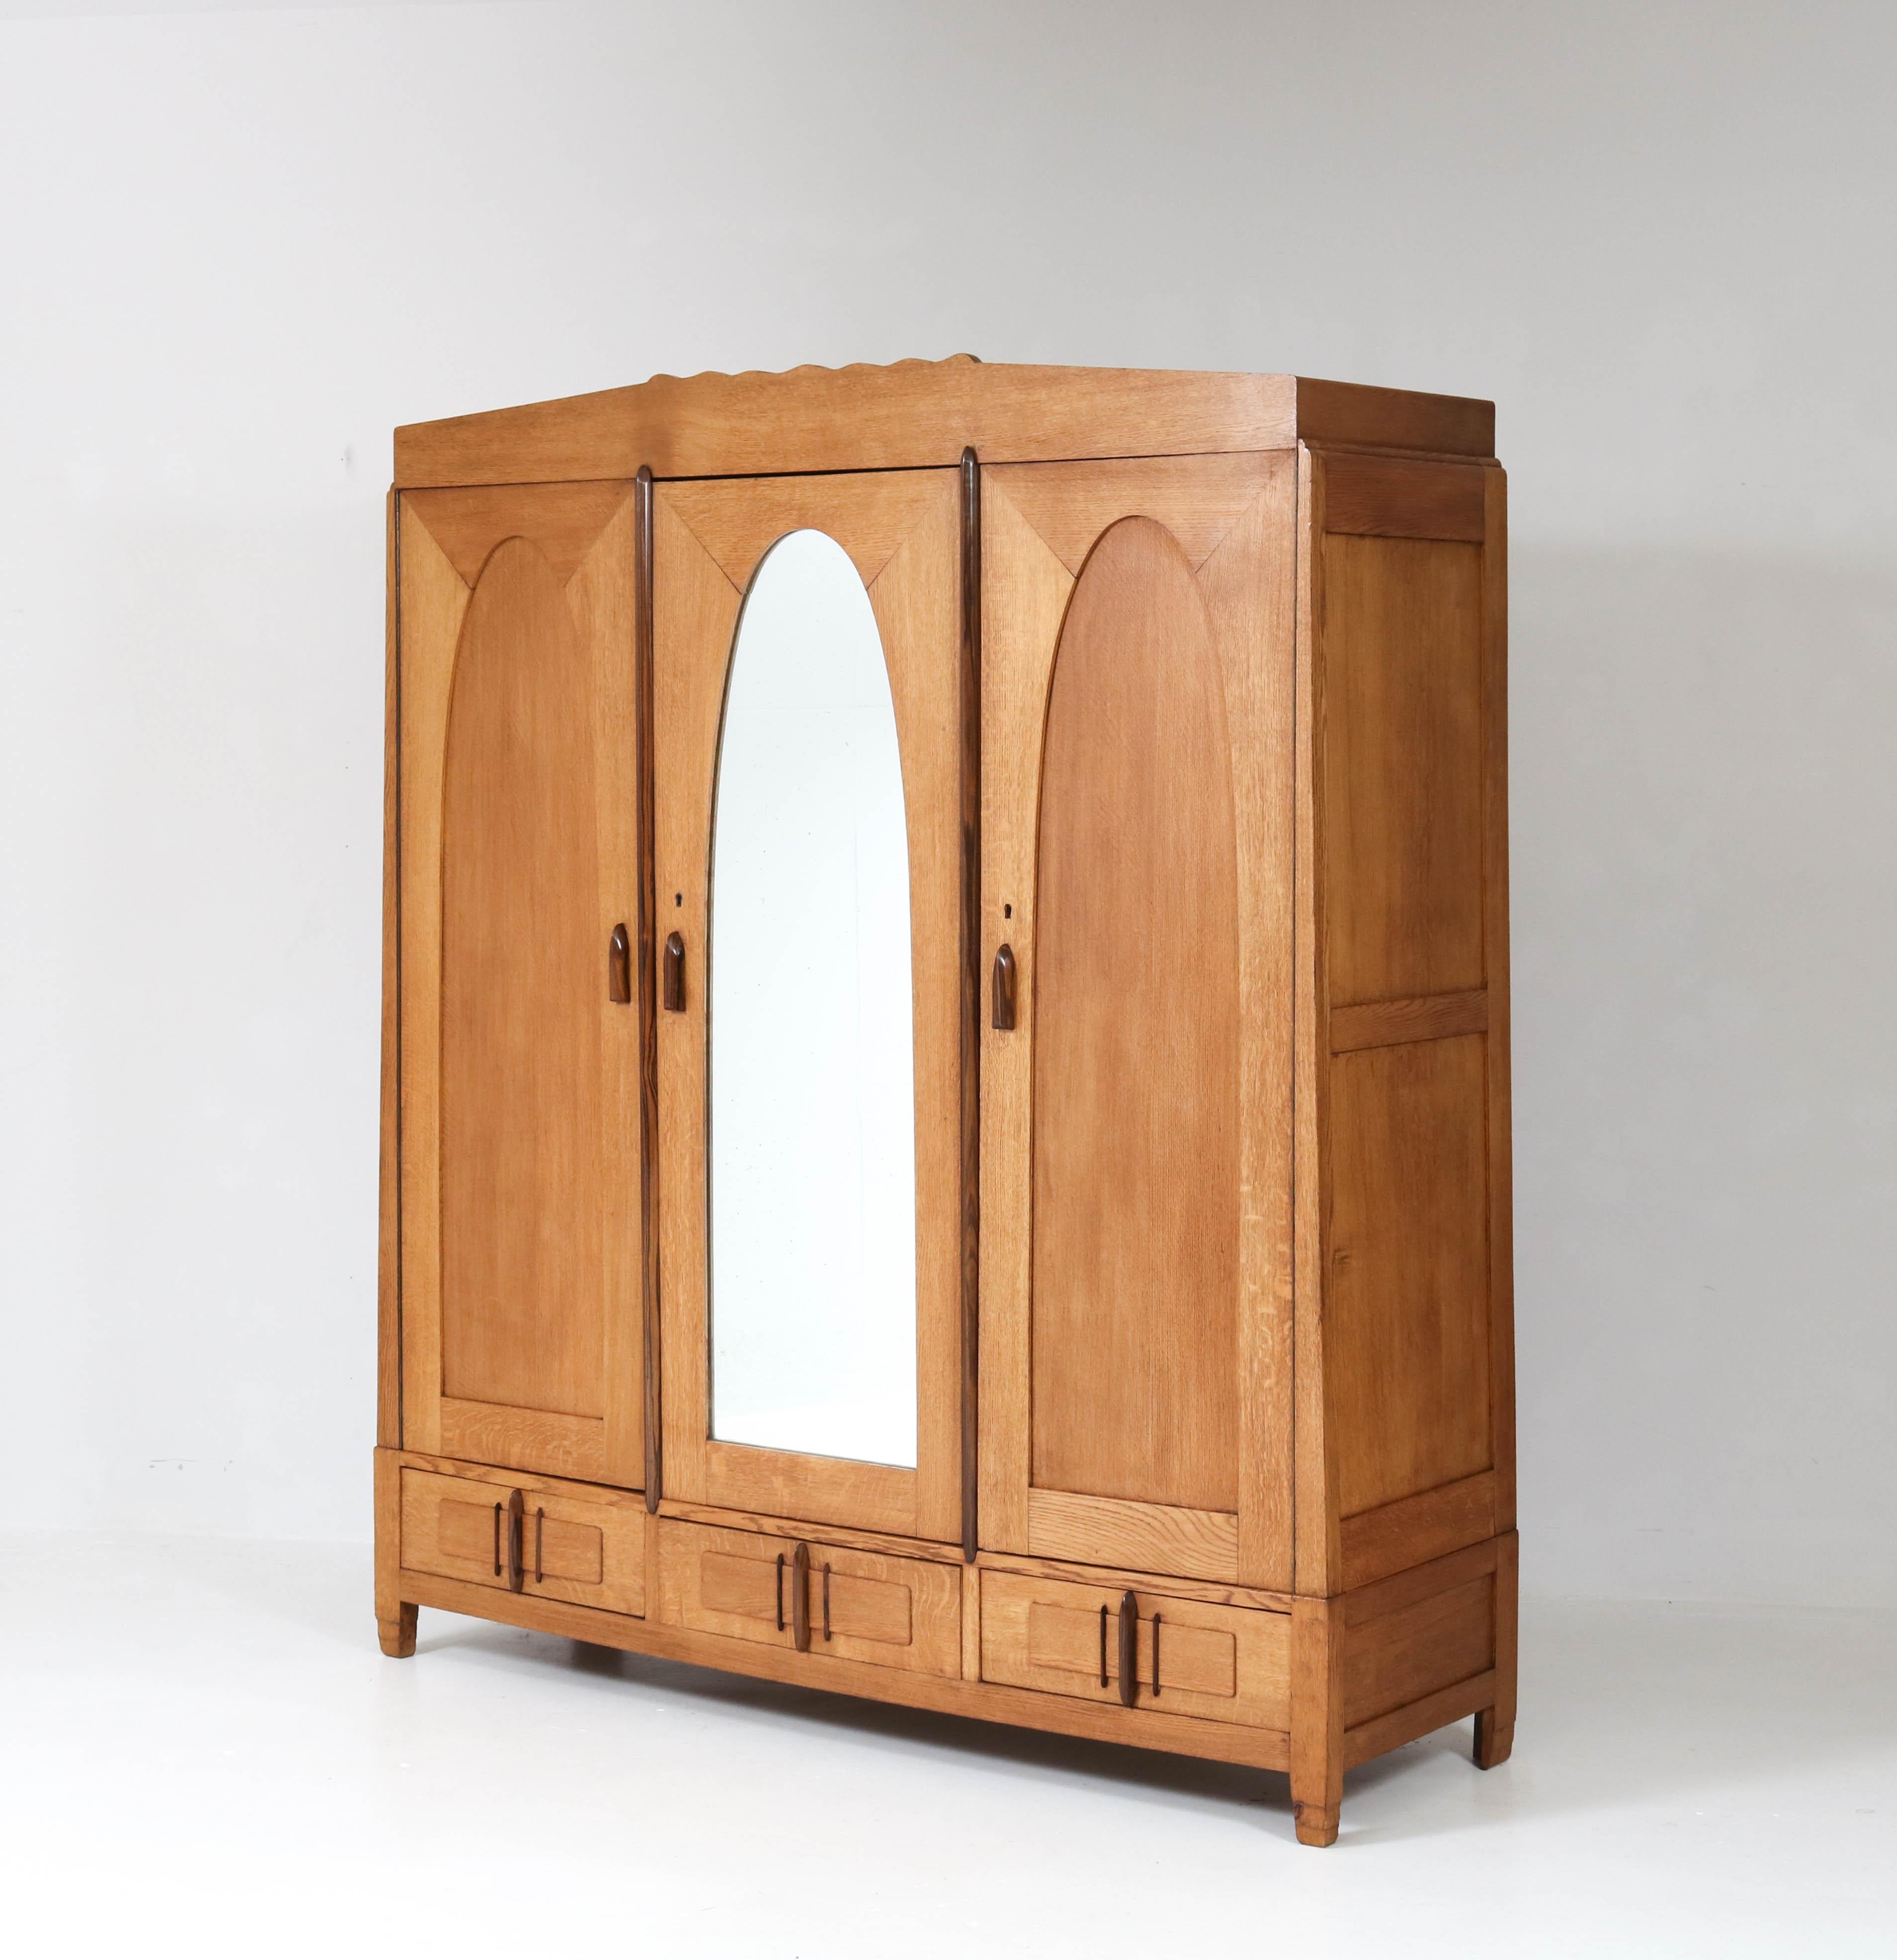 Offered by Amsterdam Modernism:
Stunning and rare Art Deco Amsterdam School armoir or wardrobe by J.J. Zijfers.
Striking Dutch design in oak from the 1920s.
Original Macassar ebony handles on doors and drawers.
This wonderful piece of furniture can